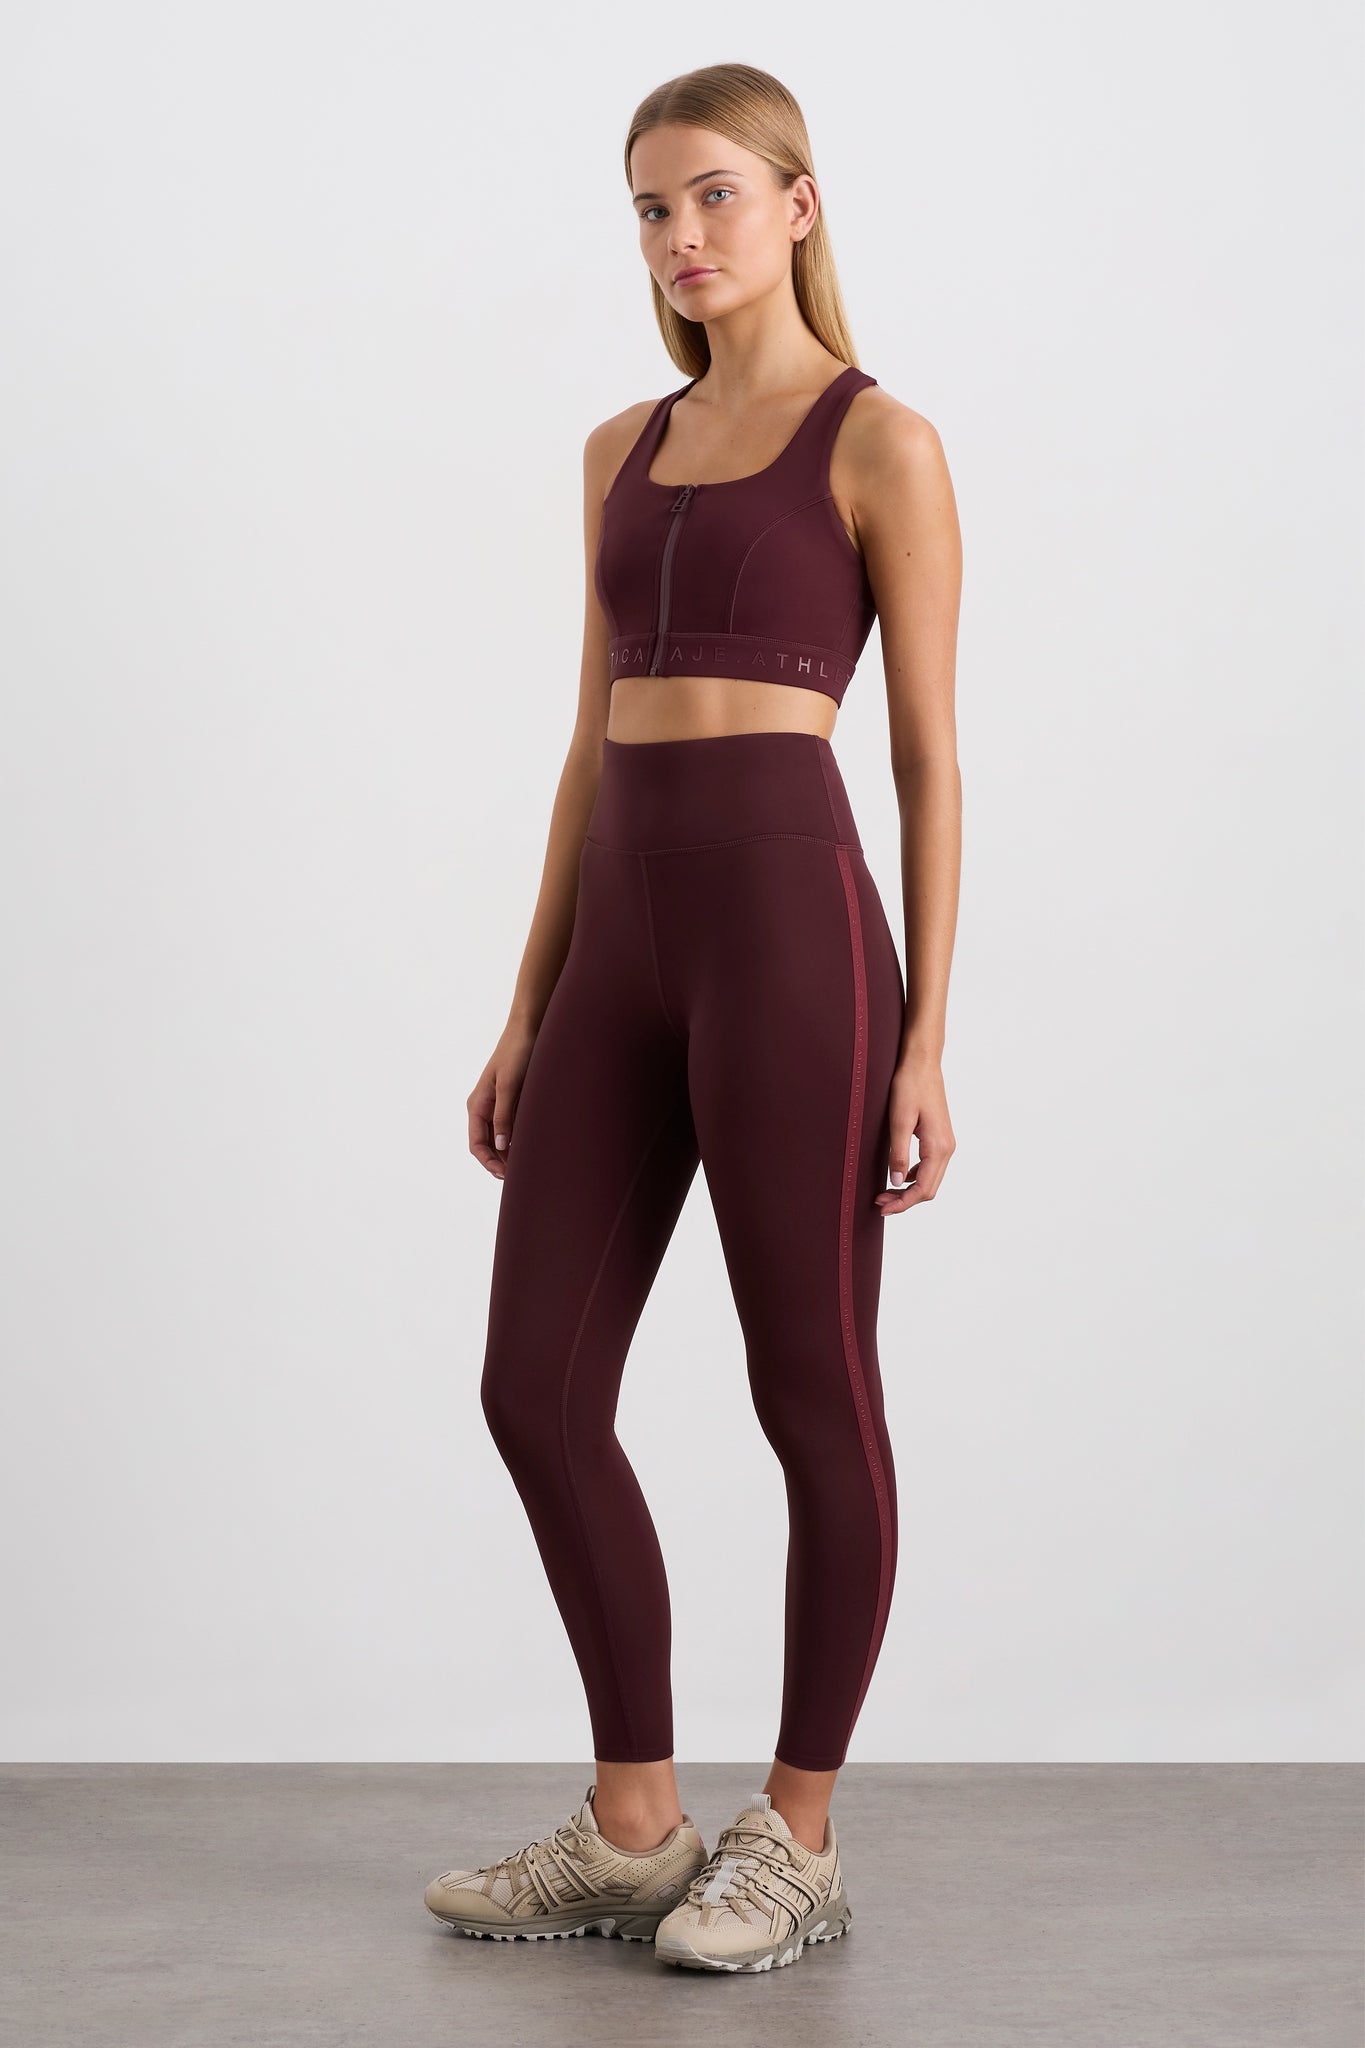 Burgundy Crossover Legging With Pockets